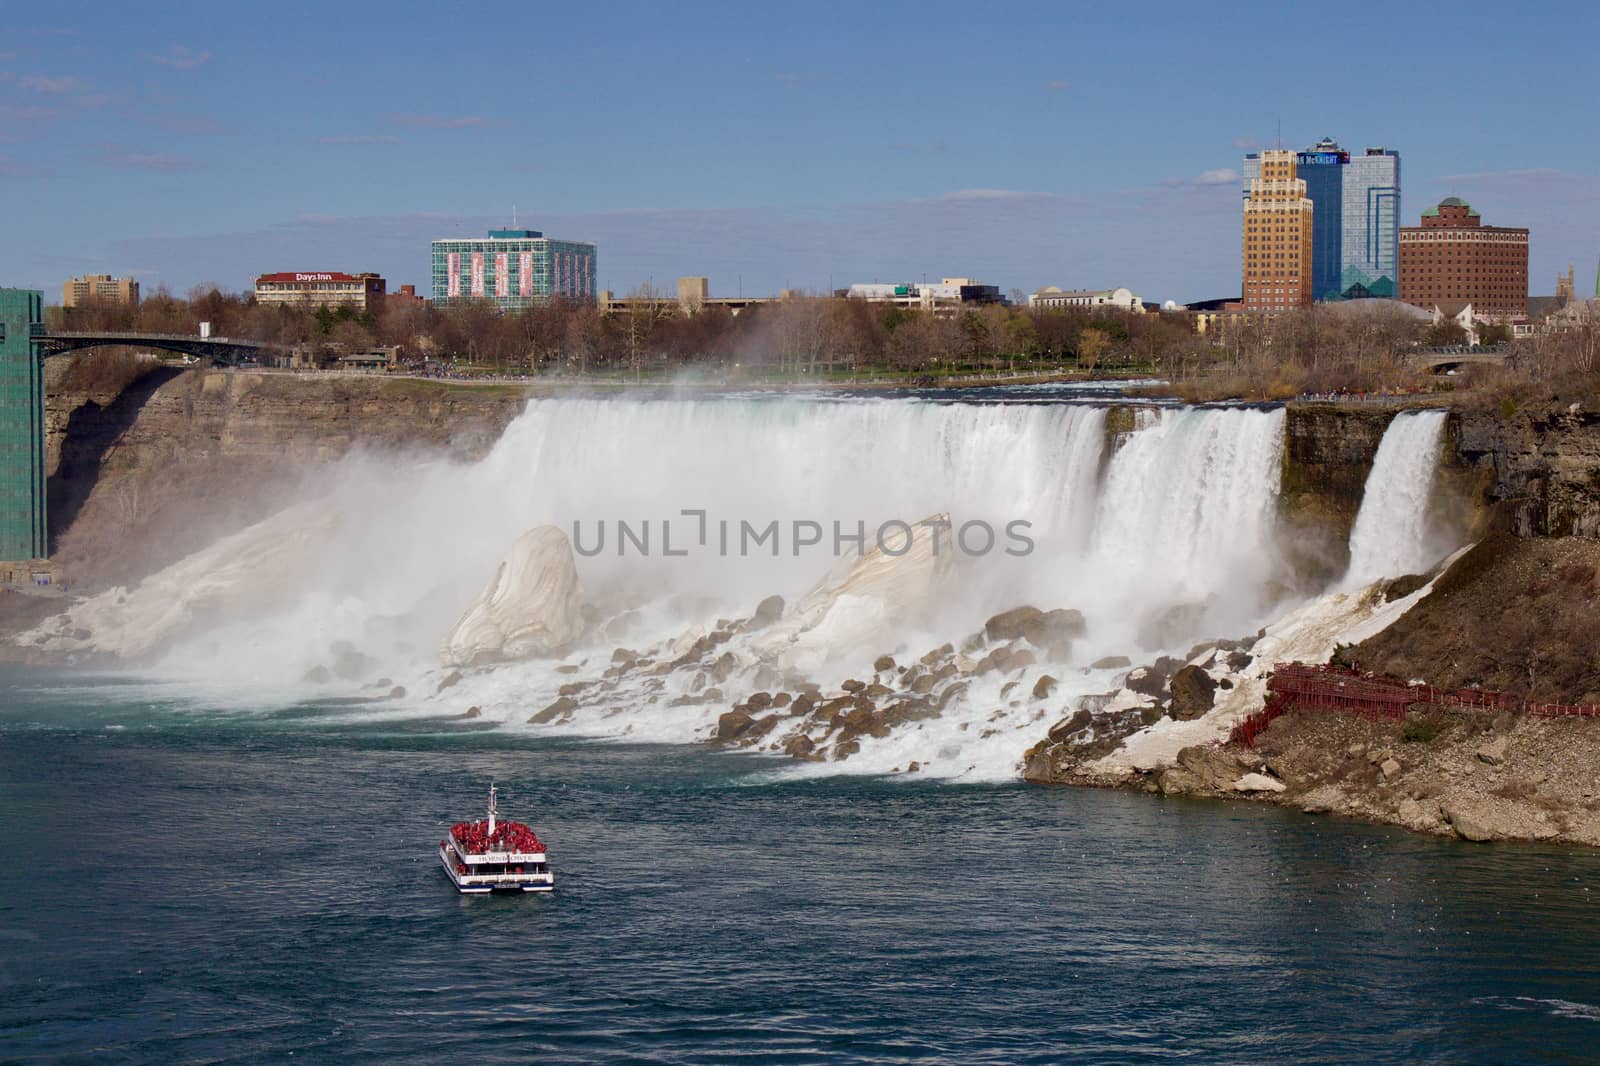 The American side of the Niagara falls with the ice